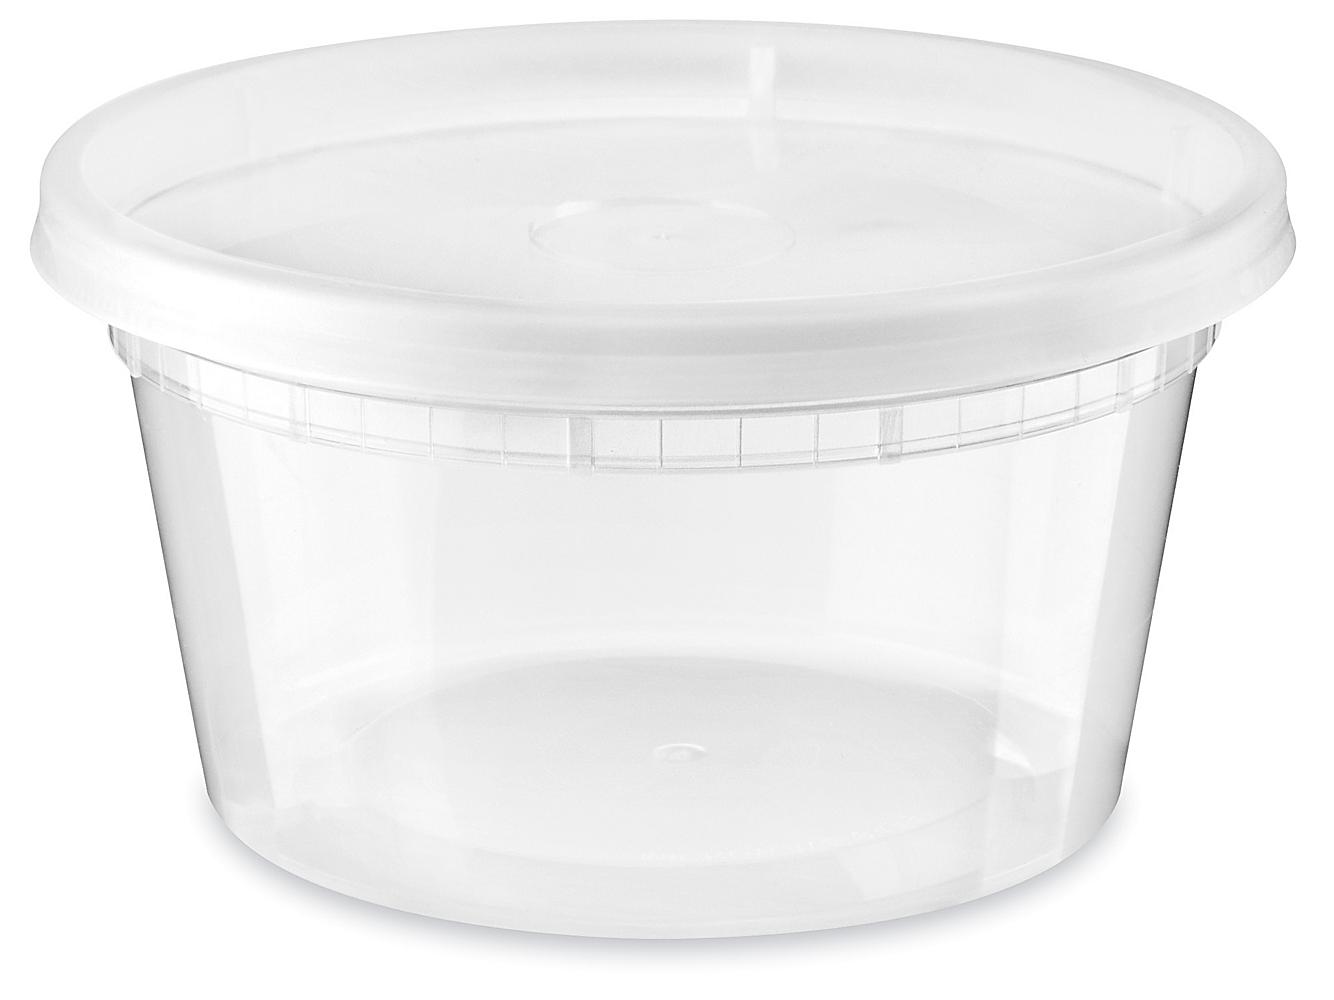 8 oz Plastic Food Storage Heavy-Duty Deli Containers with Lids